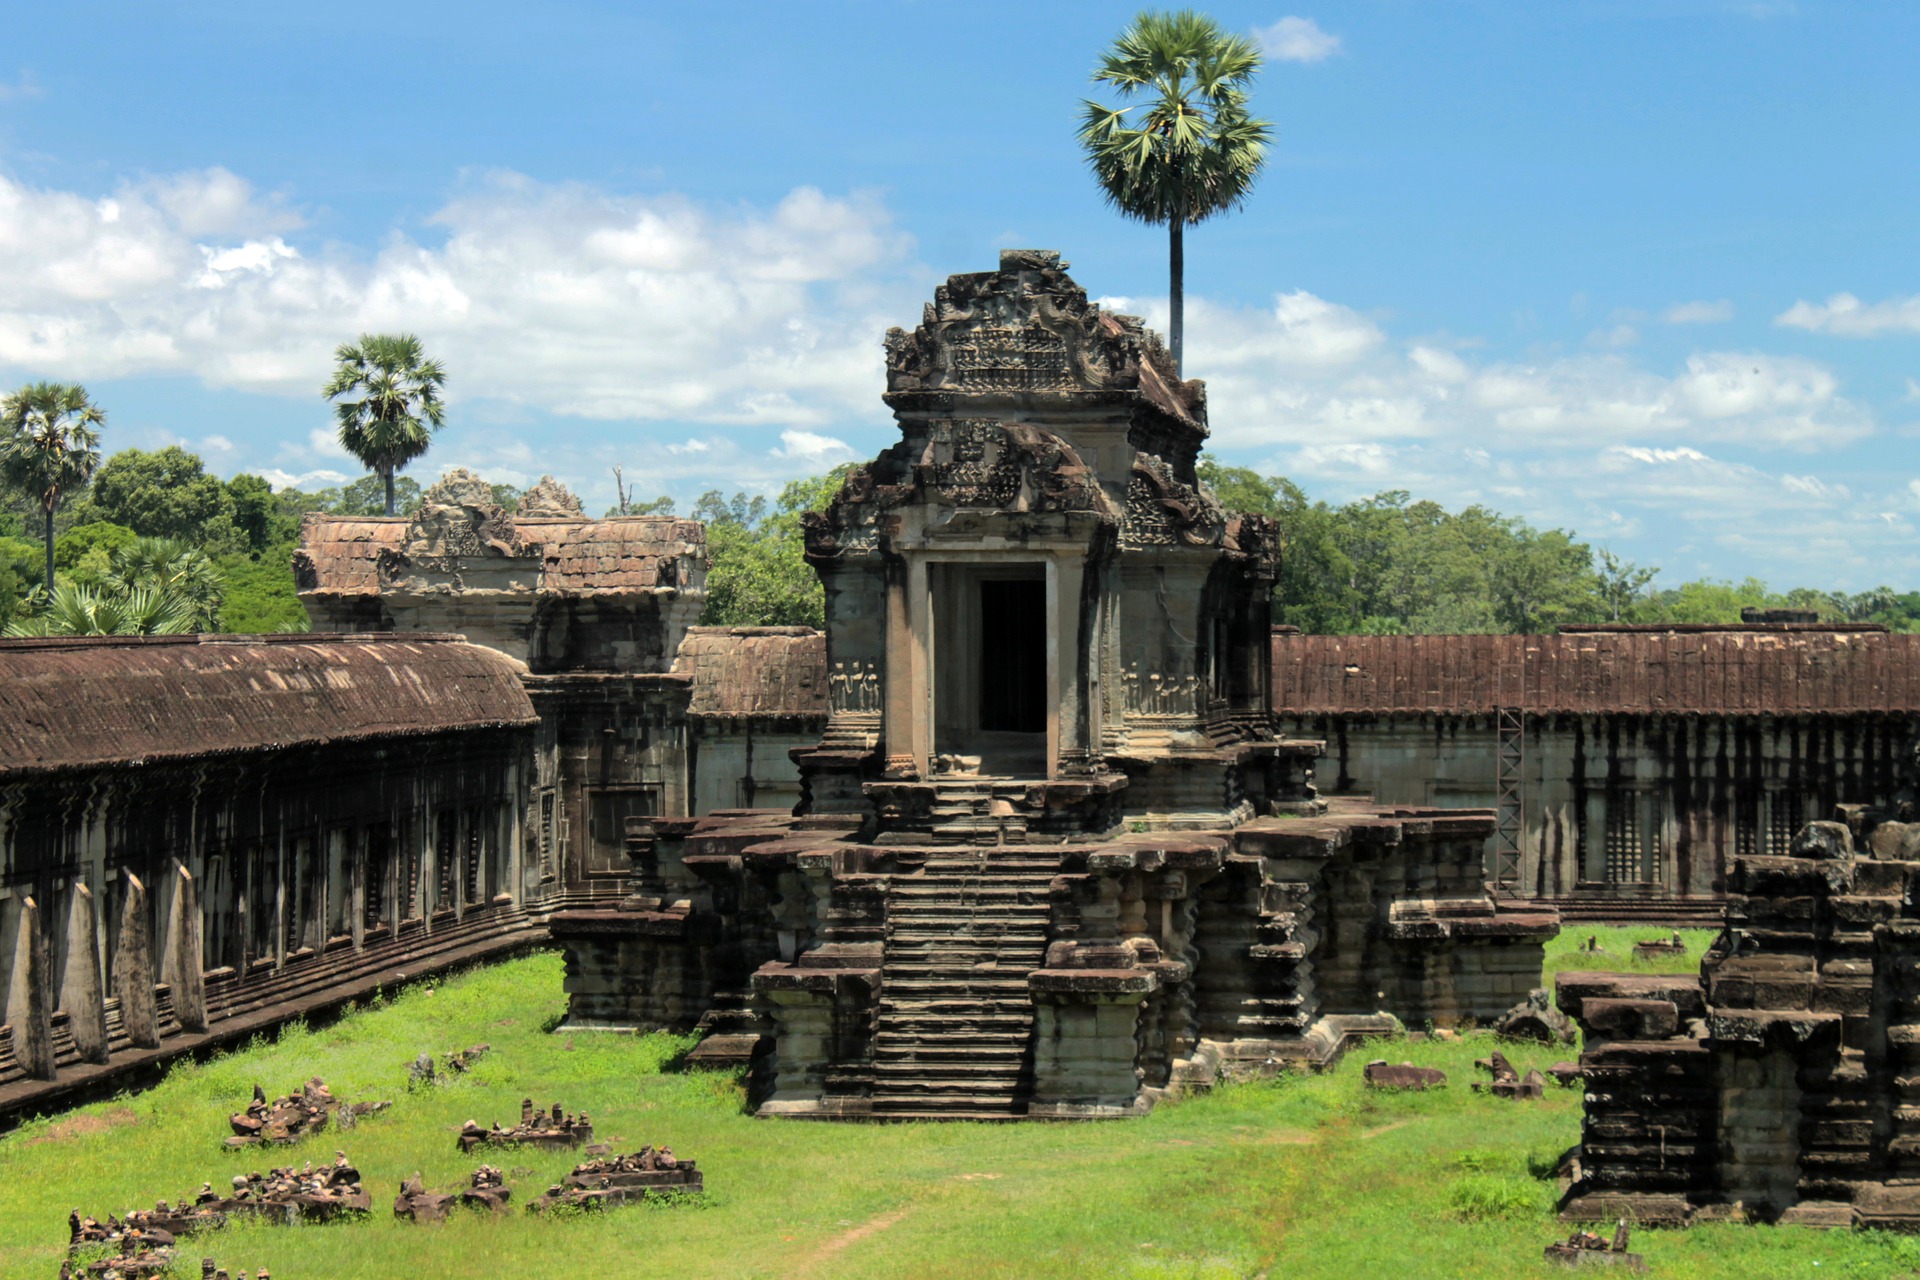 Cambodia Temple - Image by imcocaloca from Pixabay 